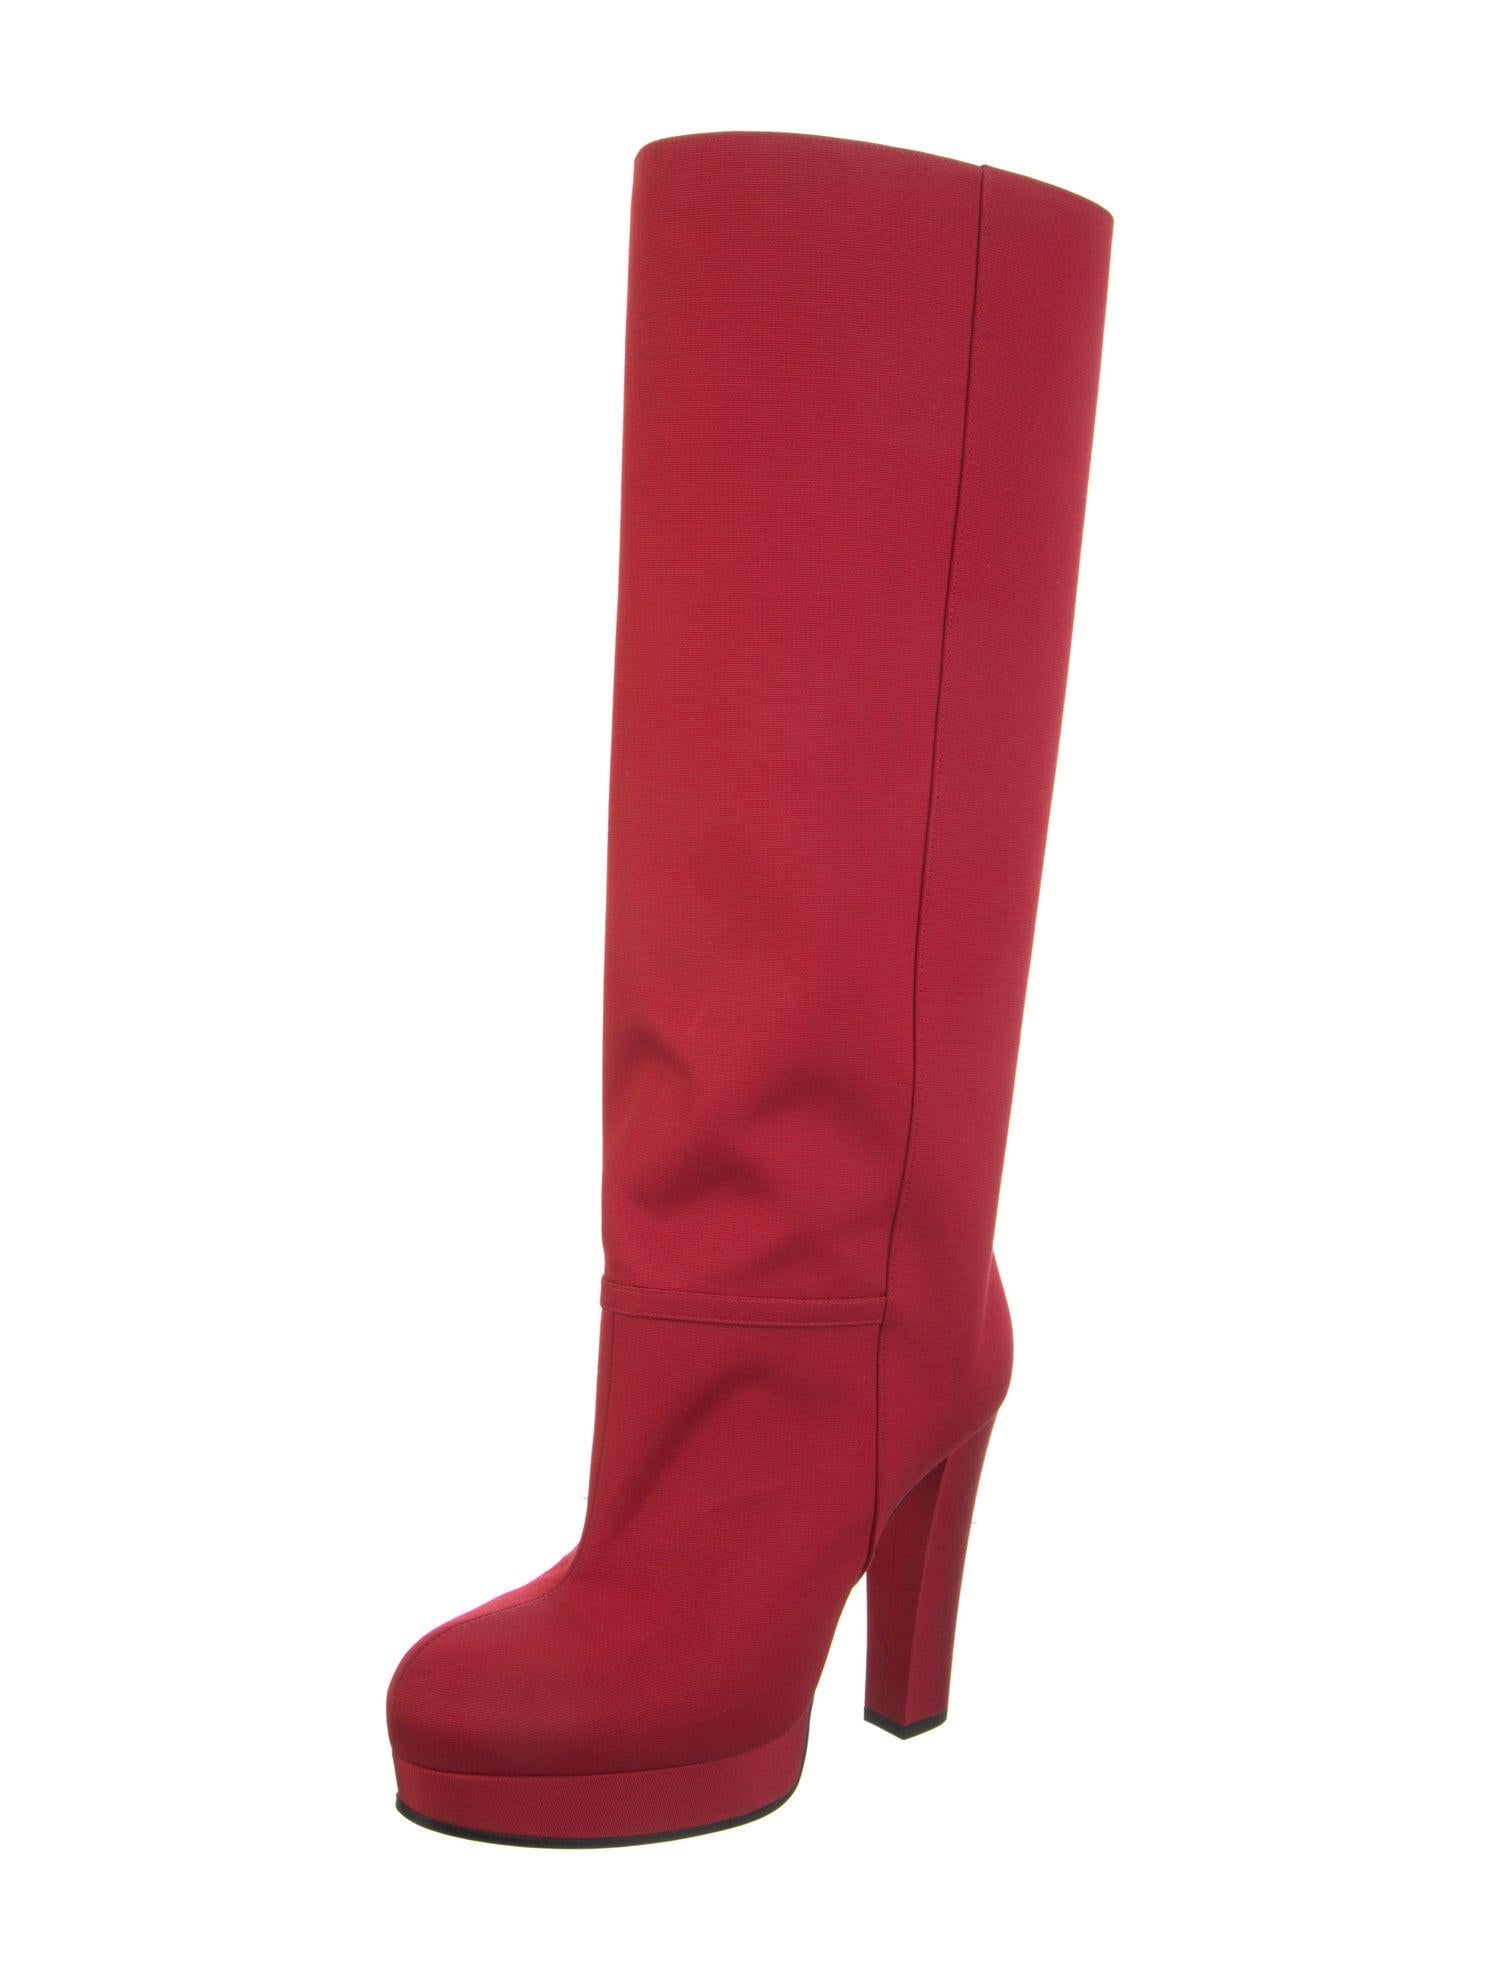 New With Box Gucci Fall 2019 Alessandro Michele Red Boots Sz 38.5 For Sale 15